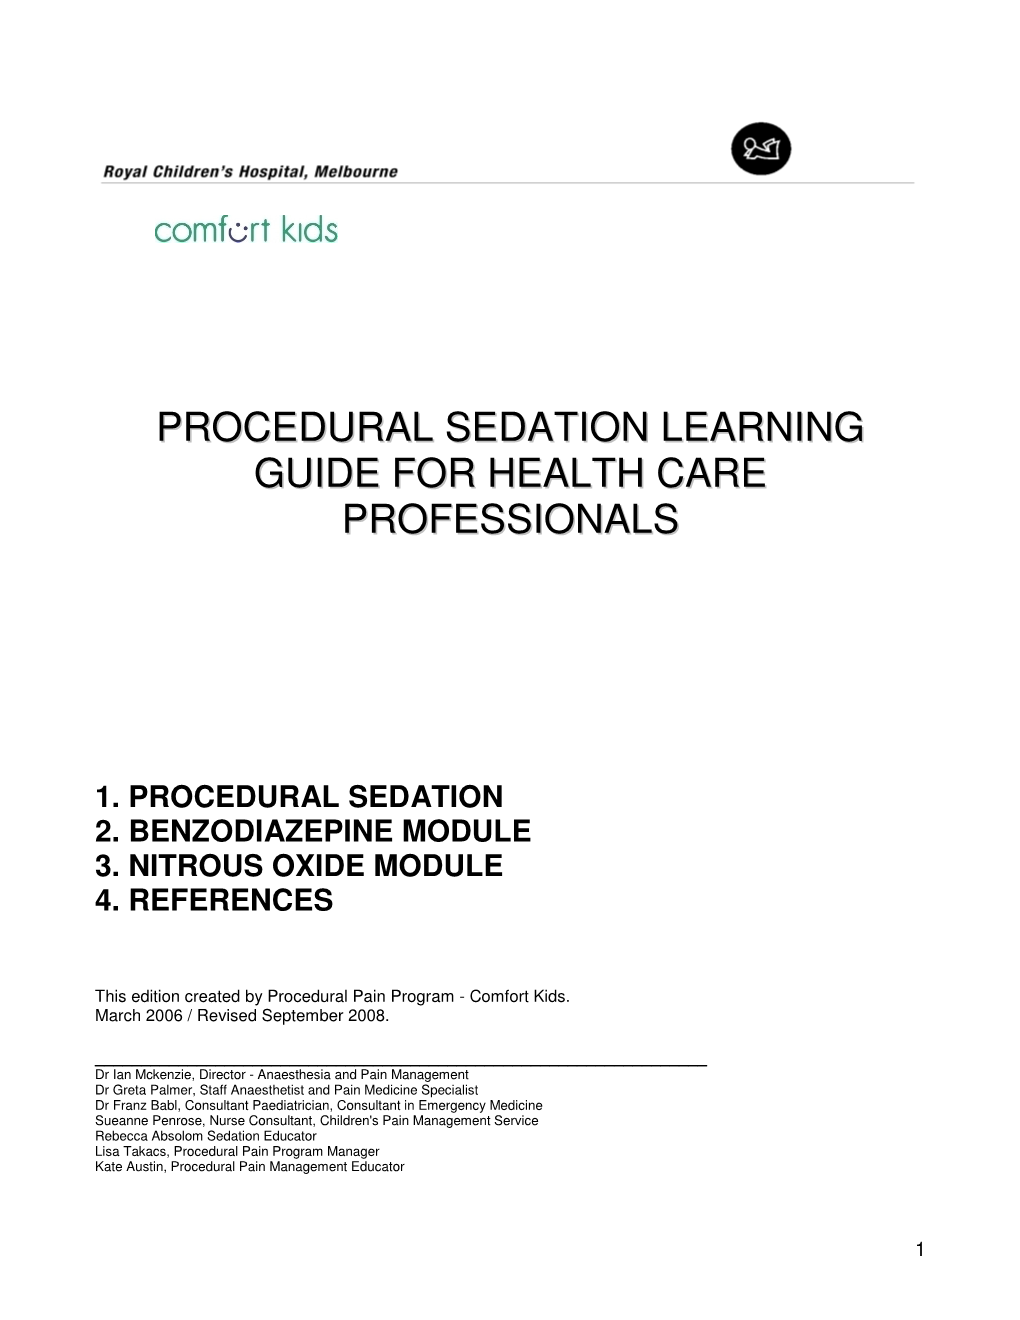 Procedural Sedation Learning Guide for Health Care Professionals